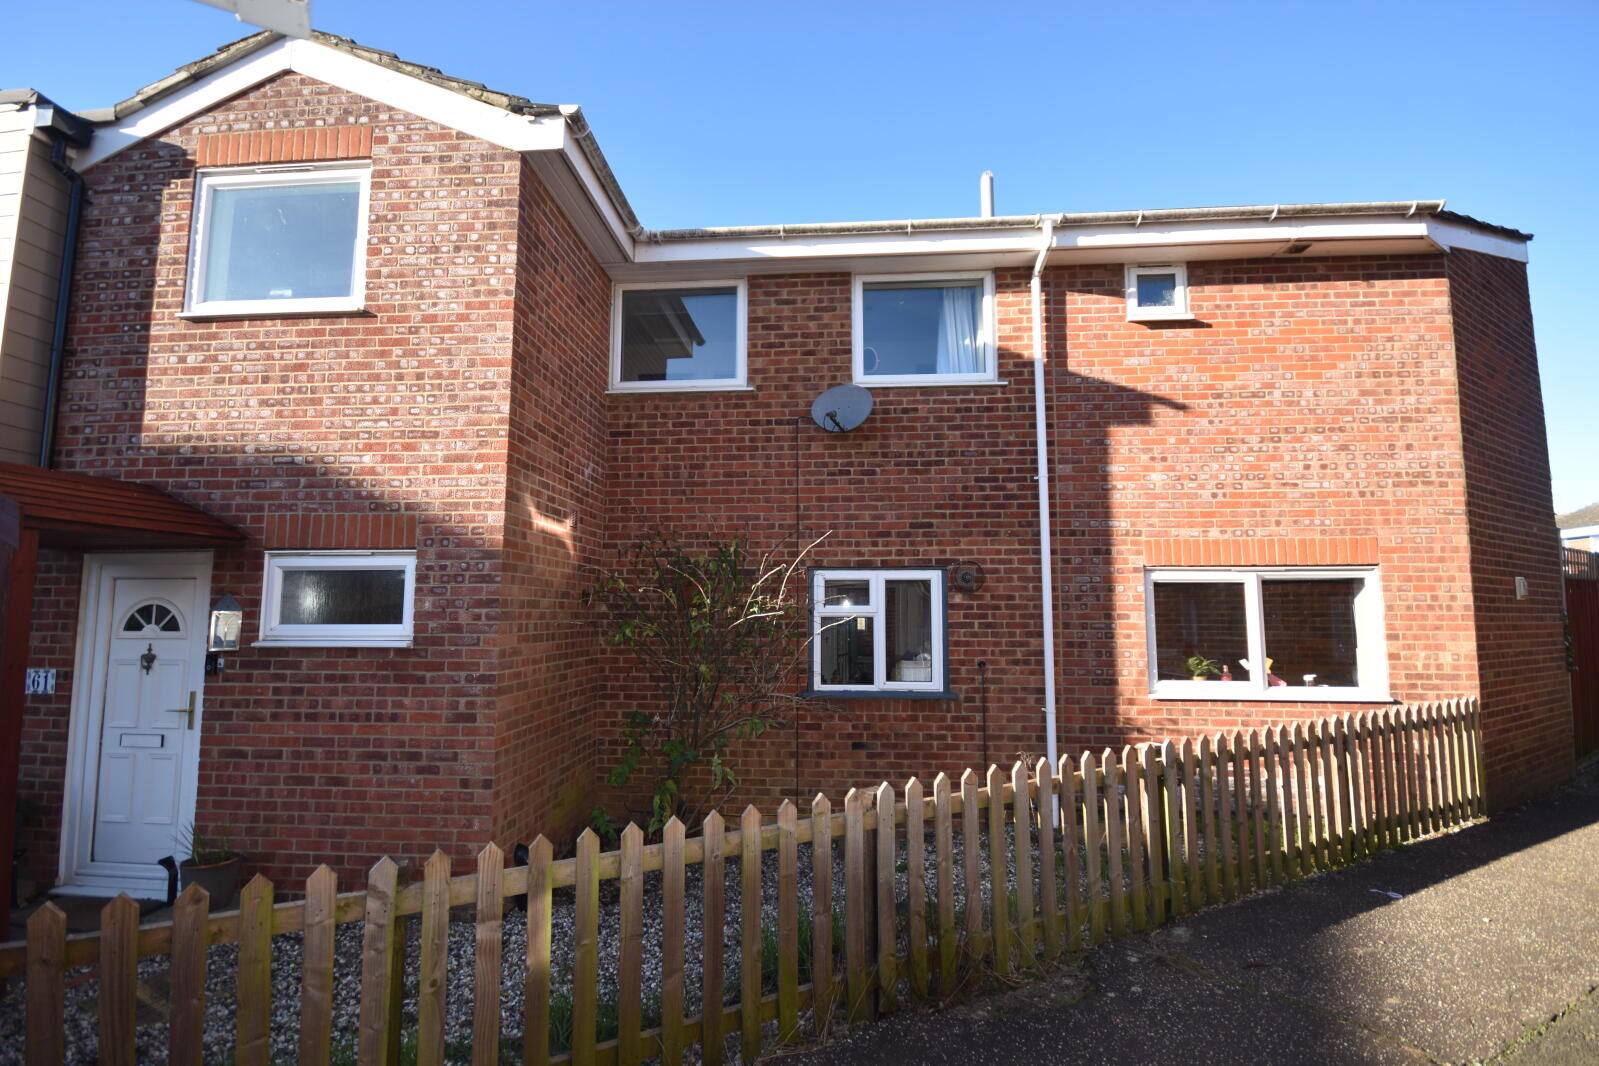 4 bedroom semi detached house to rent, Available now Ross Close, Saffron Walden, CB11, main image